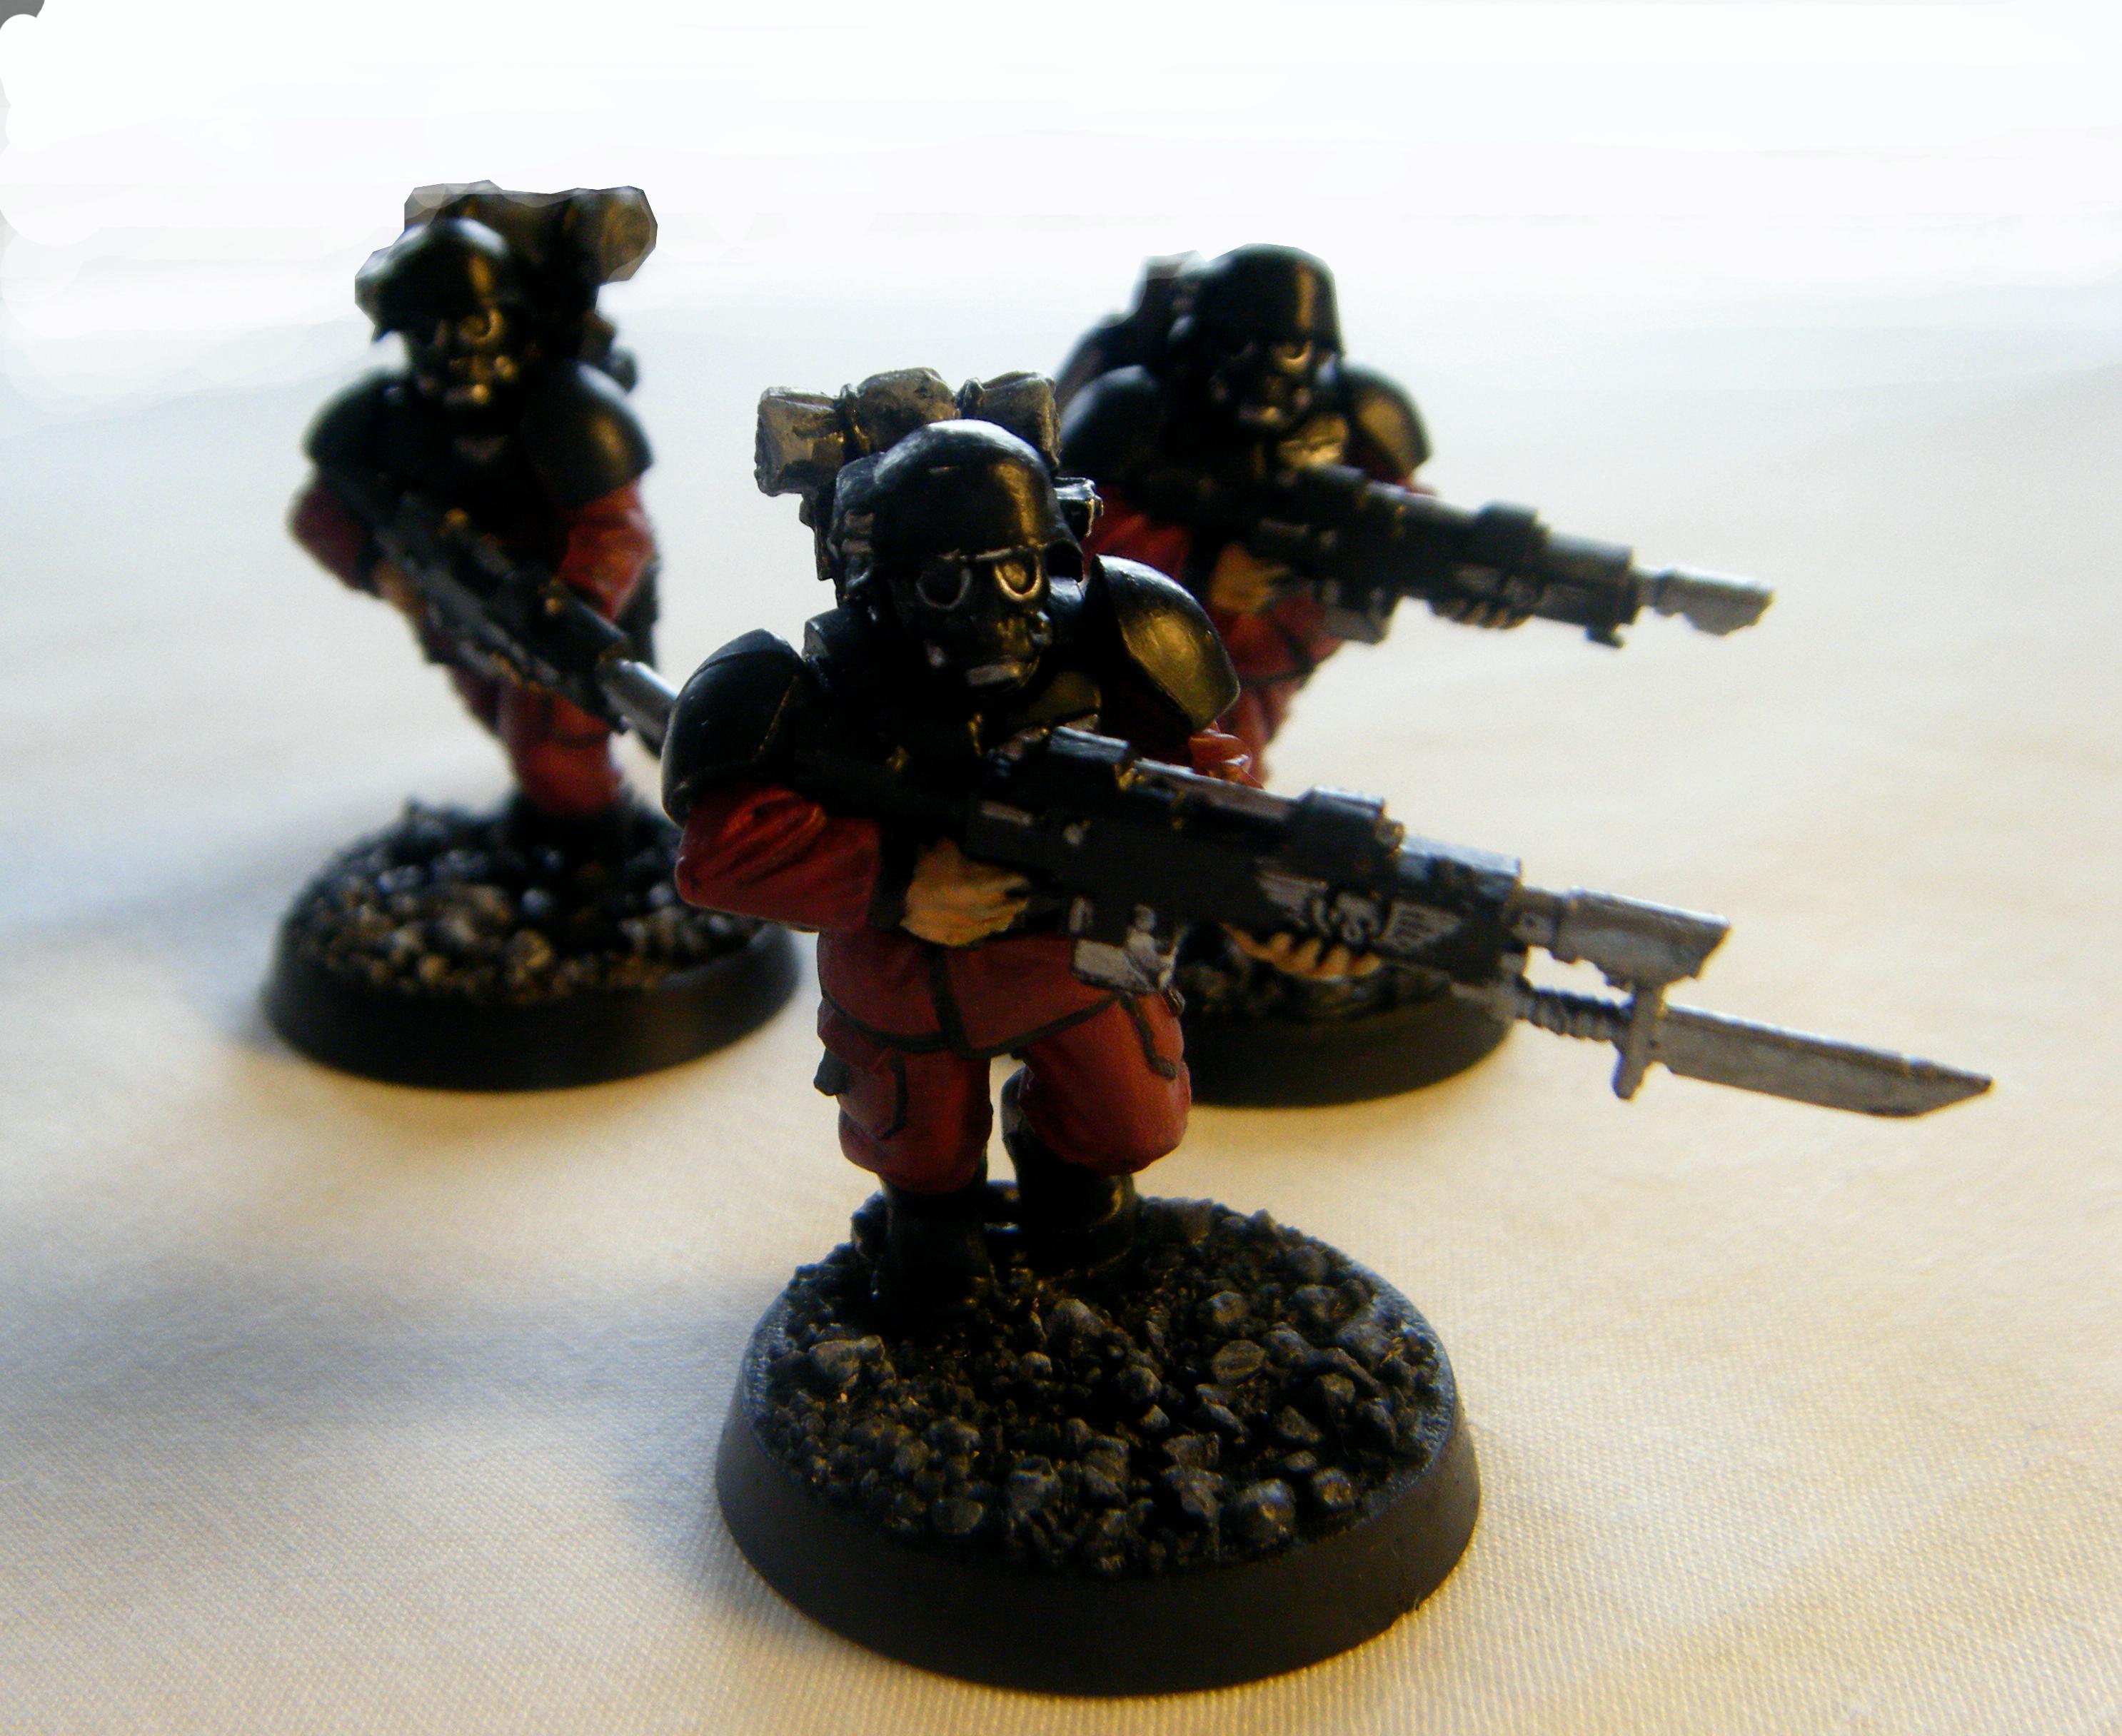 Imperial Guard, Pig Iron